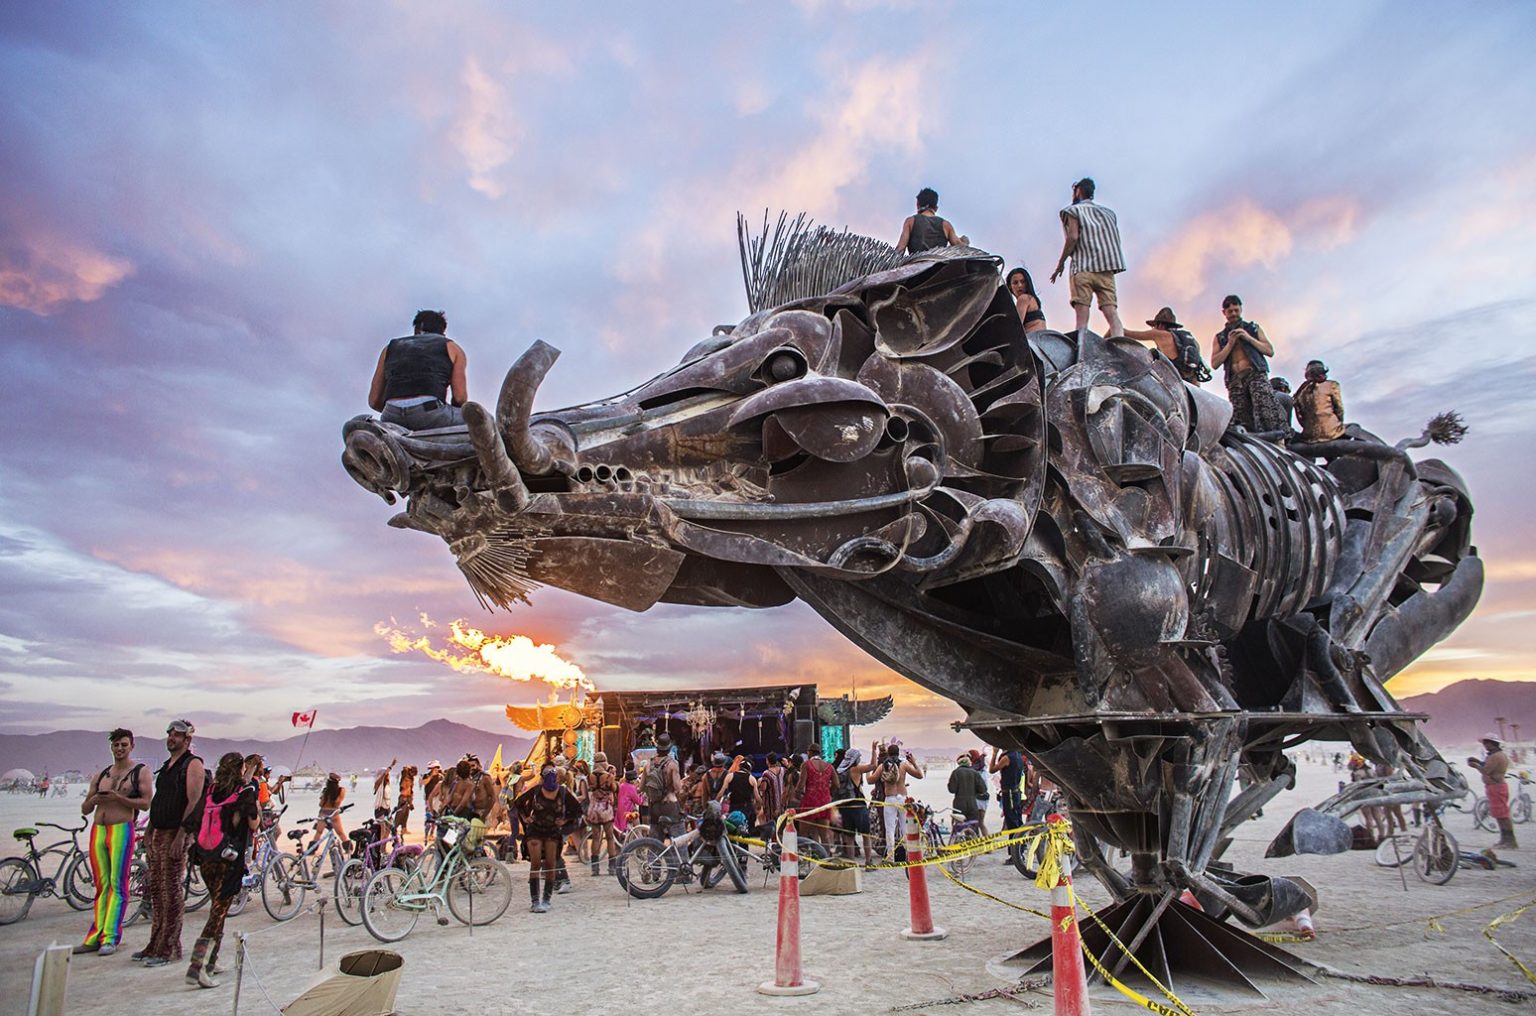 Burning Man Officially Cancels 2021 Edition; Announces Plans to Return